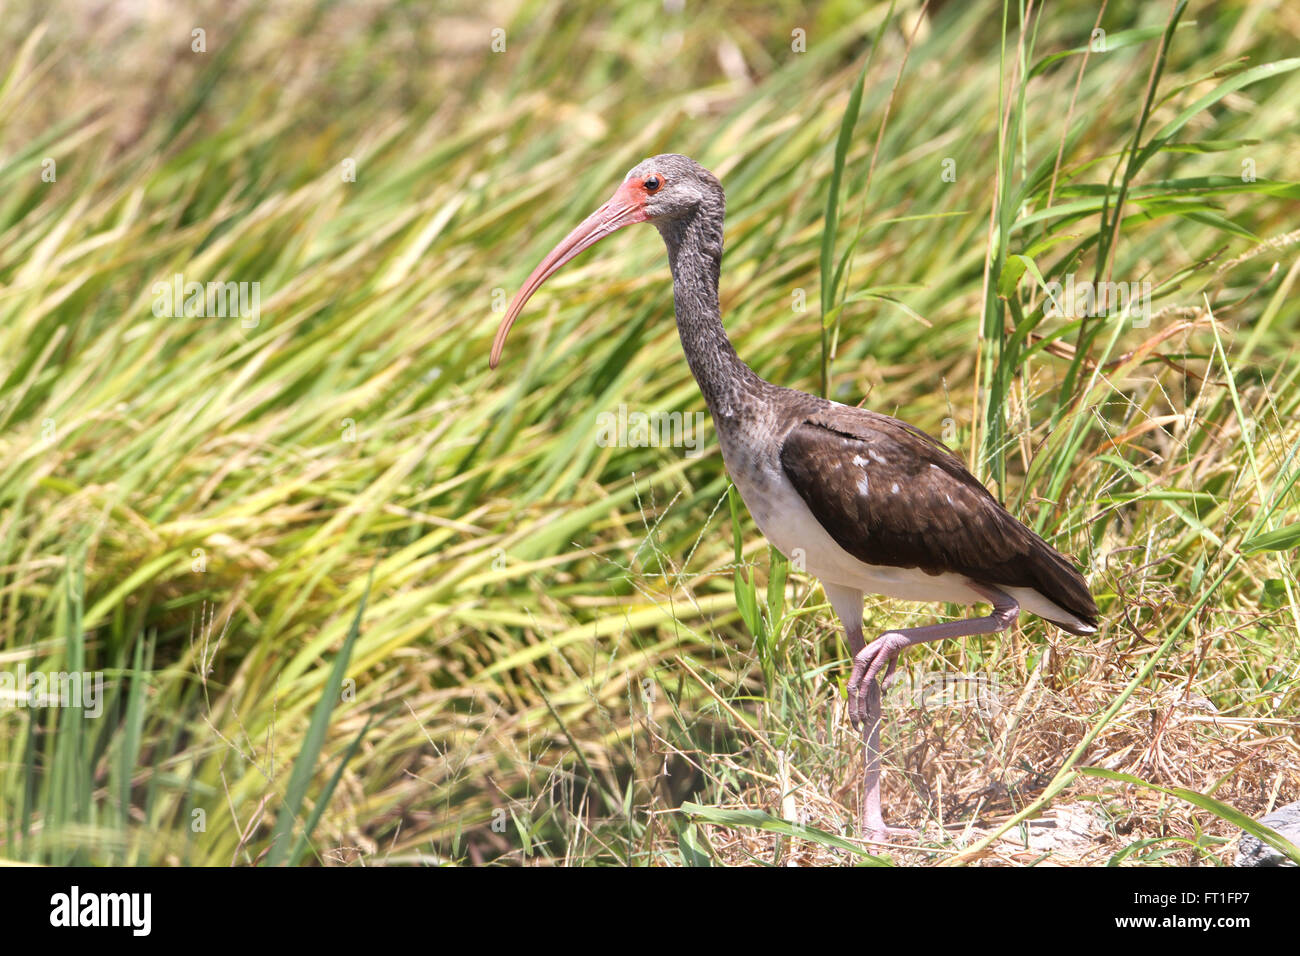 Immature White Ibis walking on a rice field looking for food Stock Photo